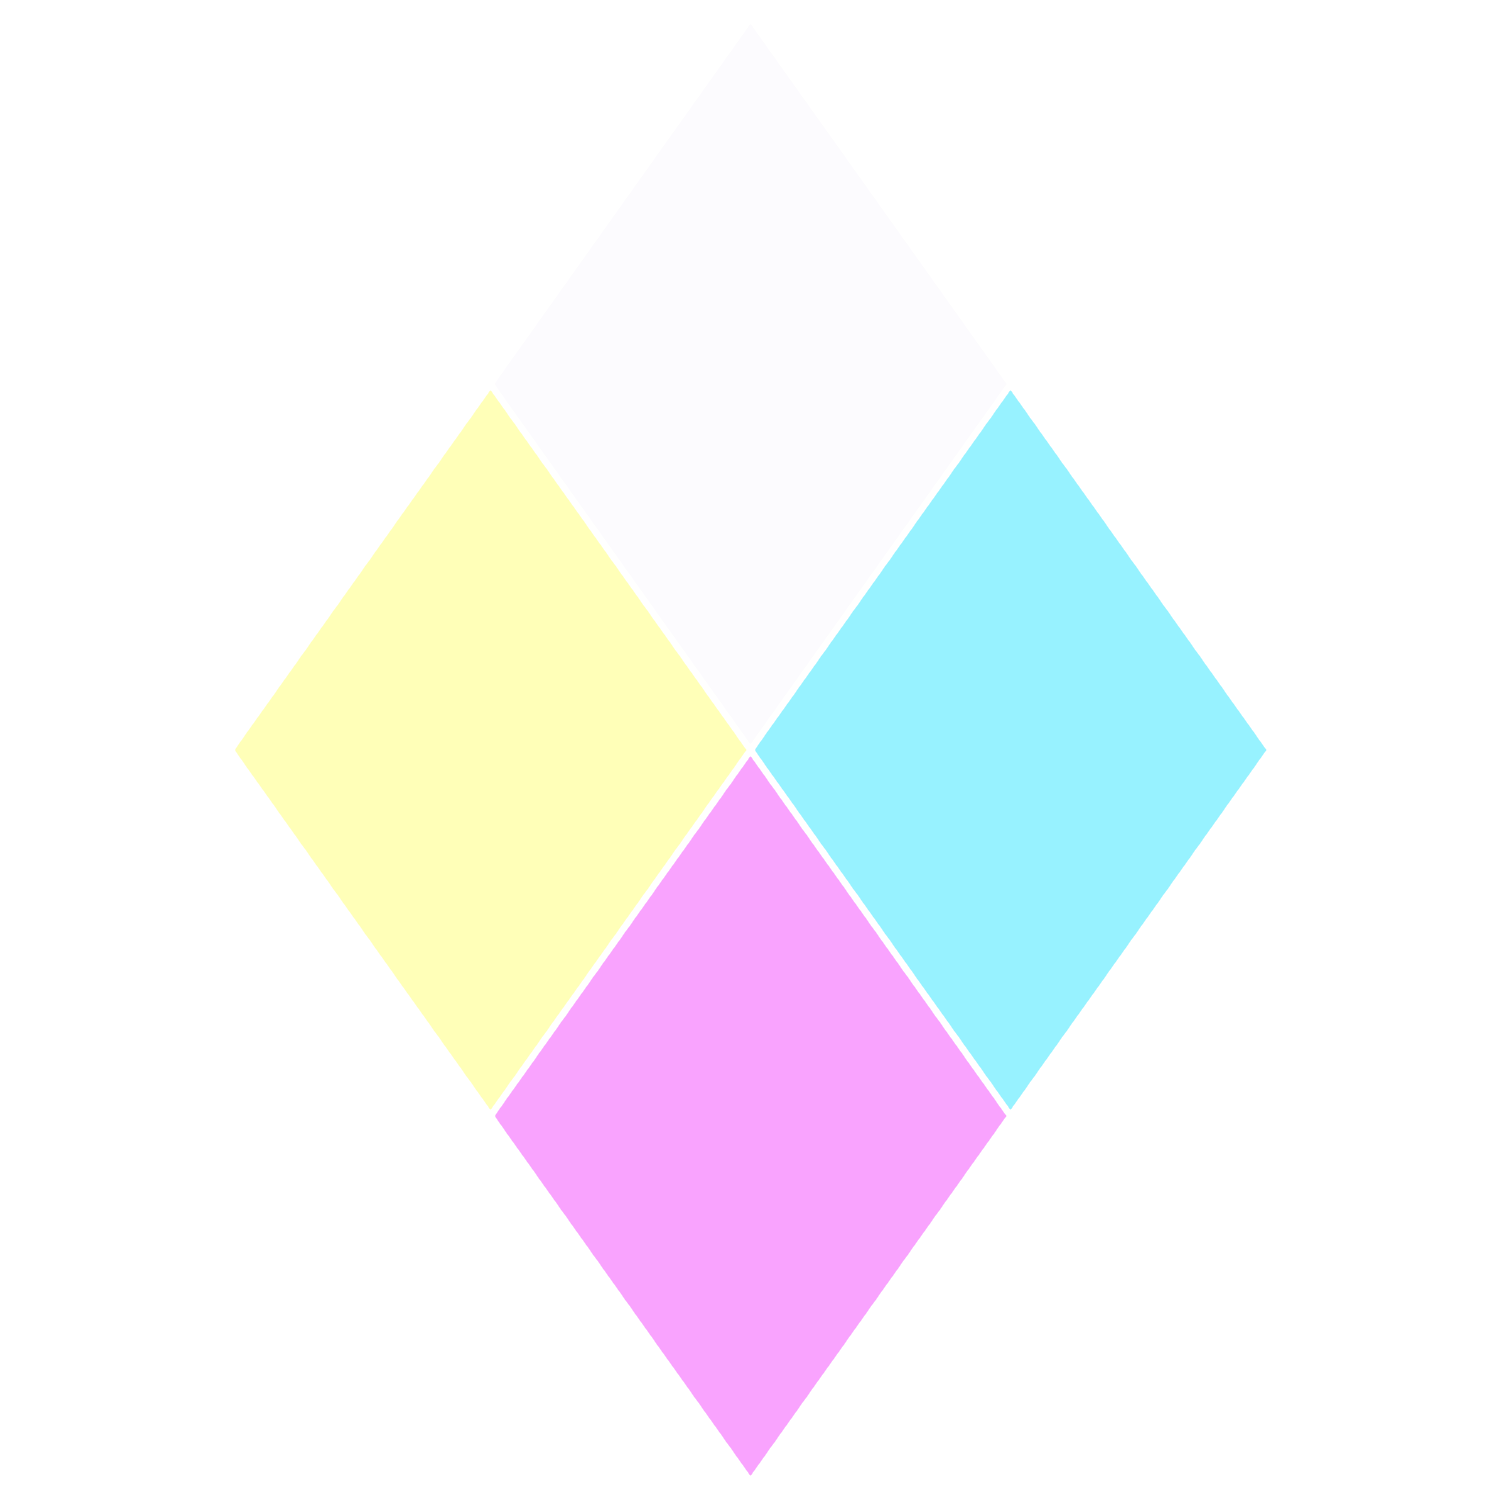 Steven Universe Diamonds Logo - Have we seen any image of Pink Diamond and White Diamond in Steven